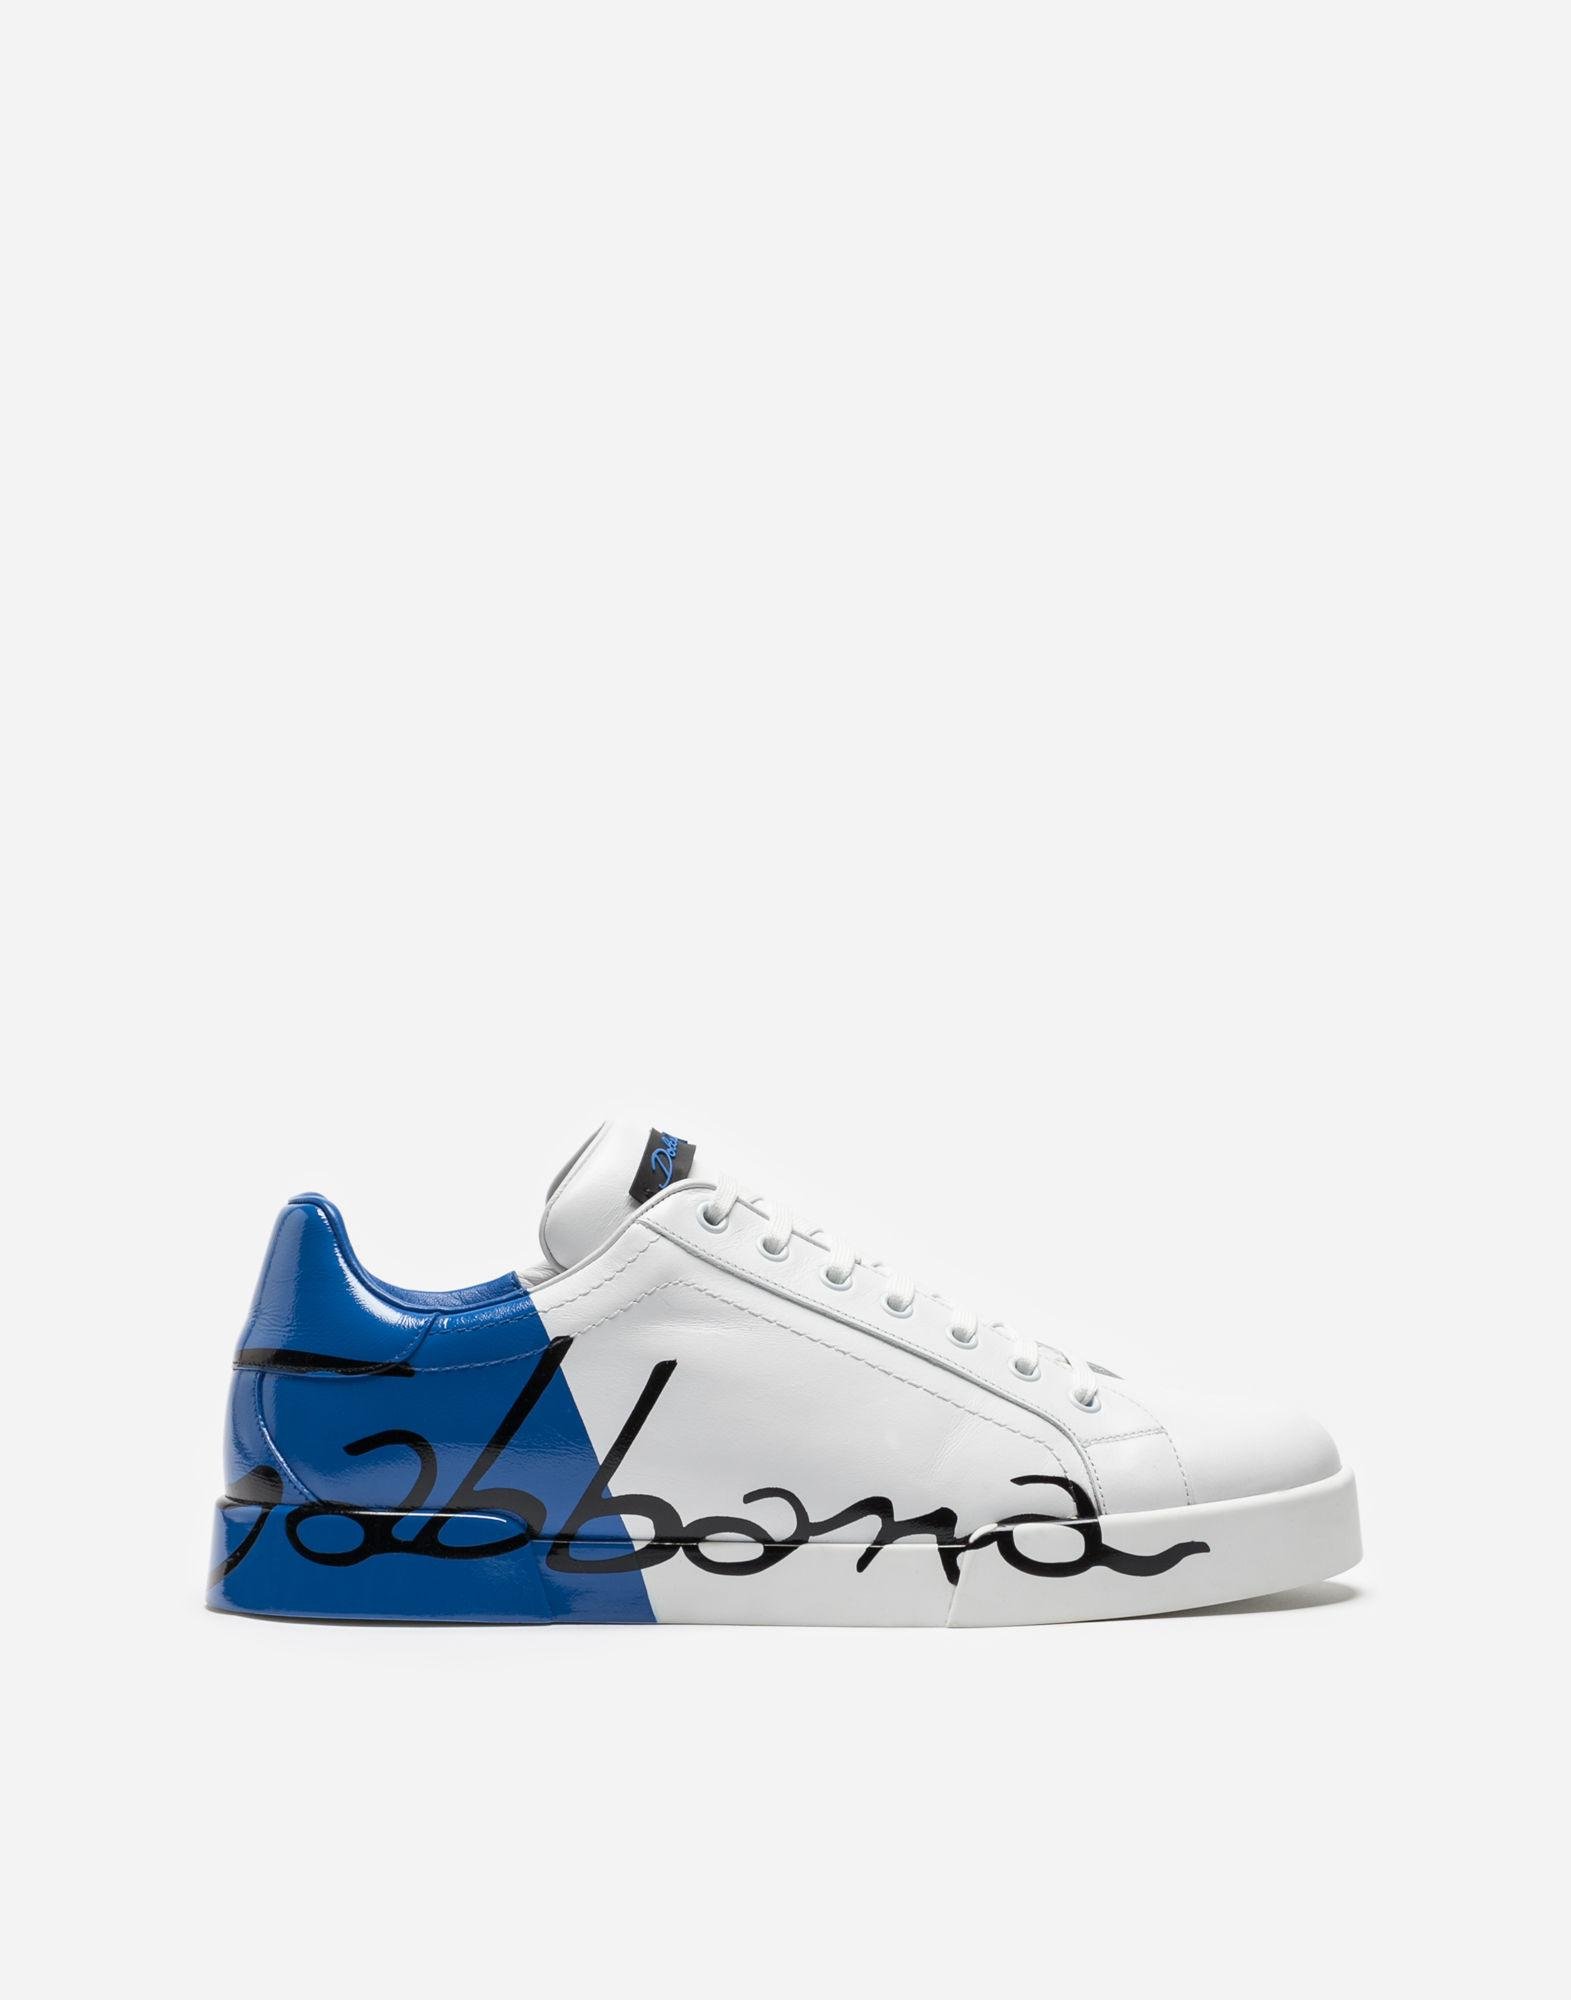 Dolce & Gabbana Portofino Sneakers In Leather And Patent in White/Blue  (Blue) for Men - Lyst